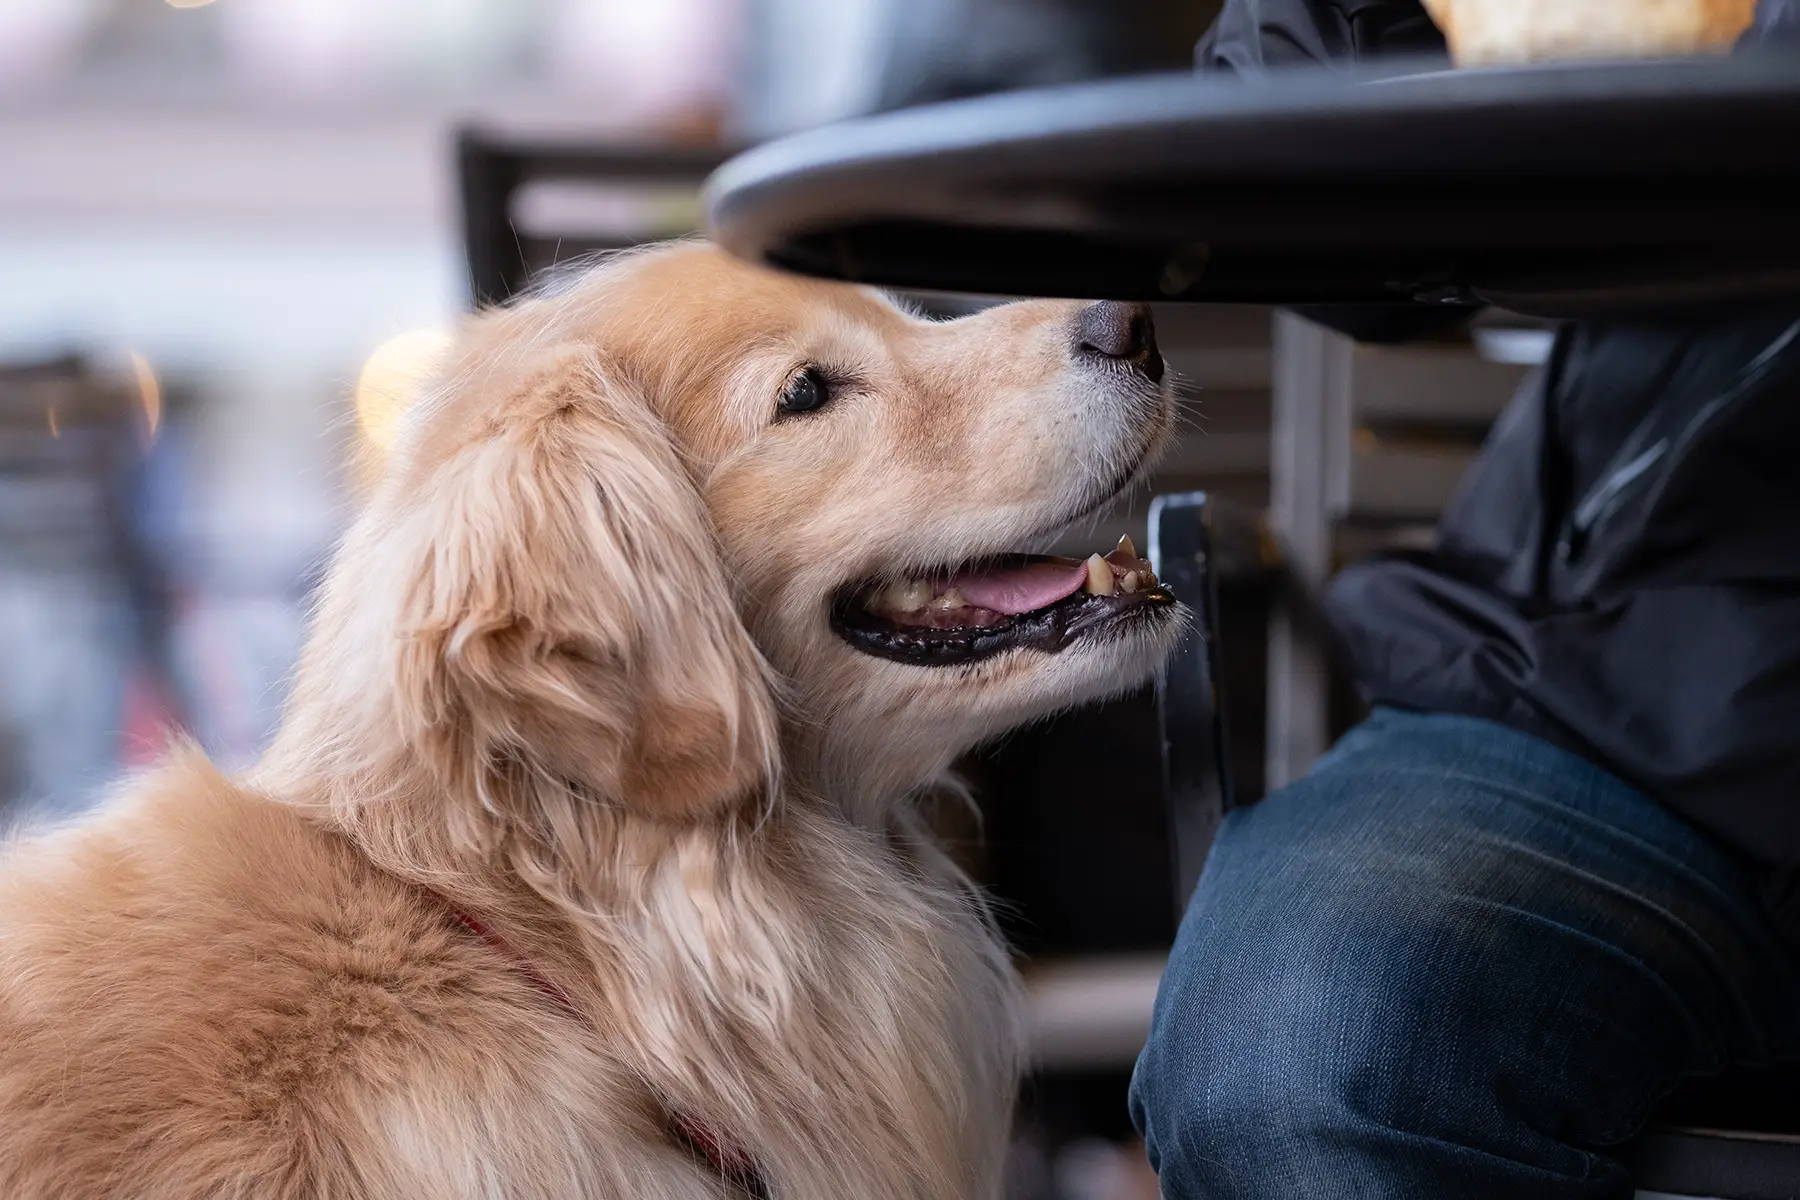 Pets in public in Japan: a golden retriever sitting next to a table in a café